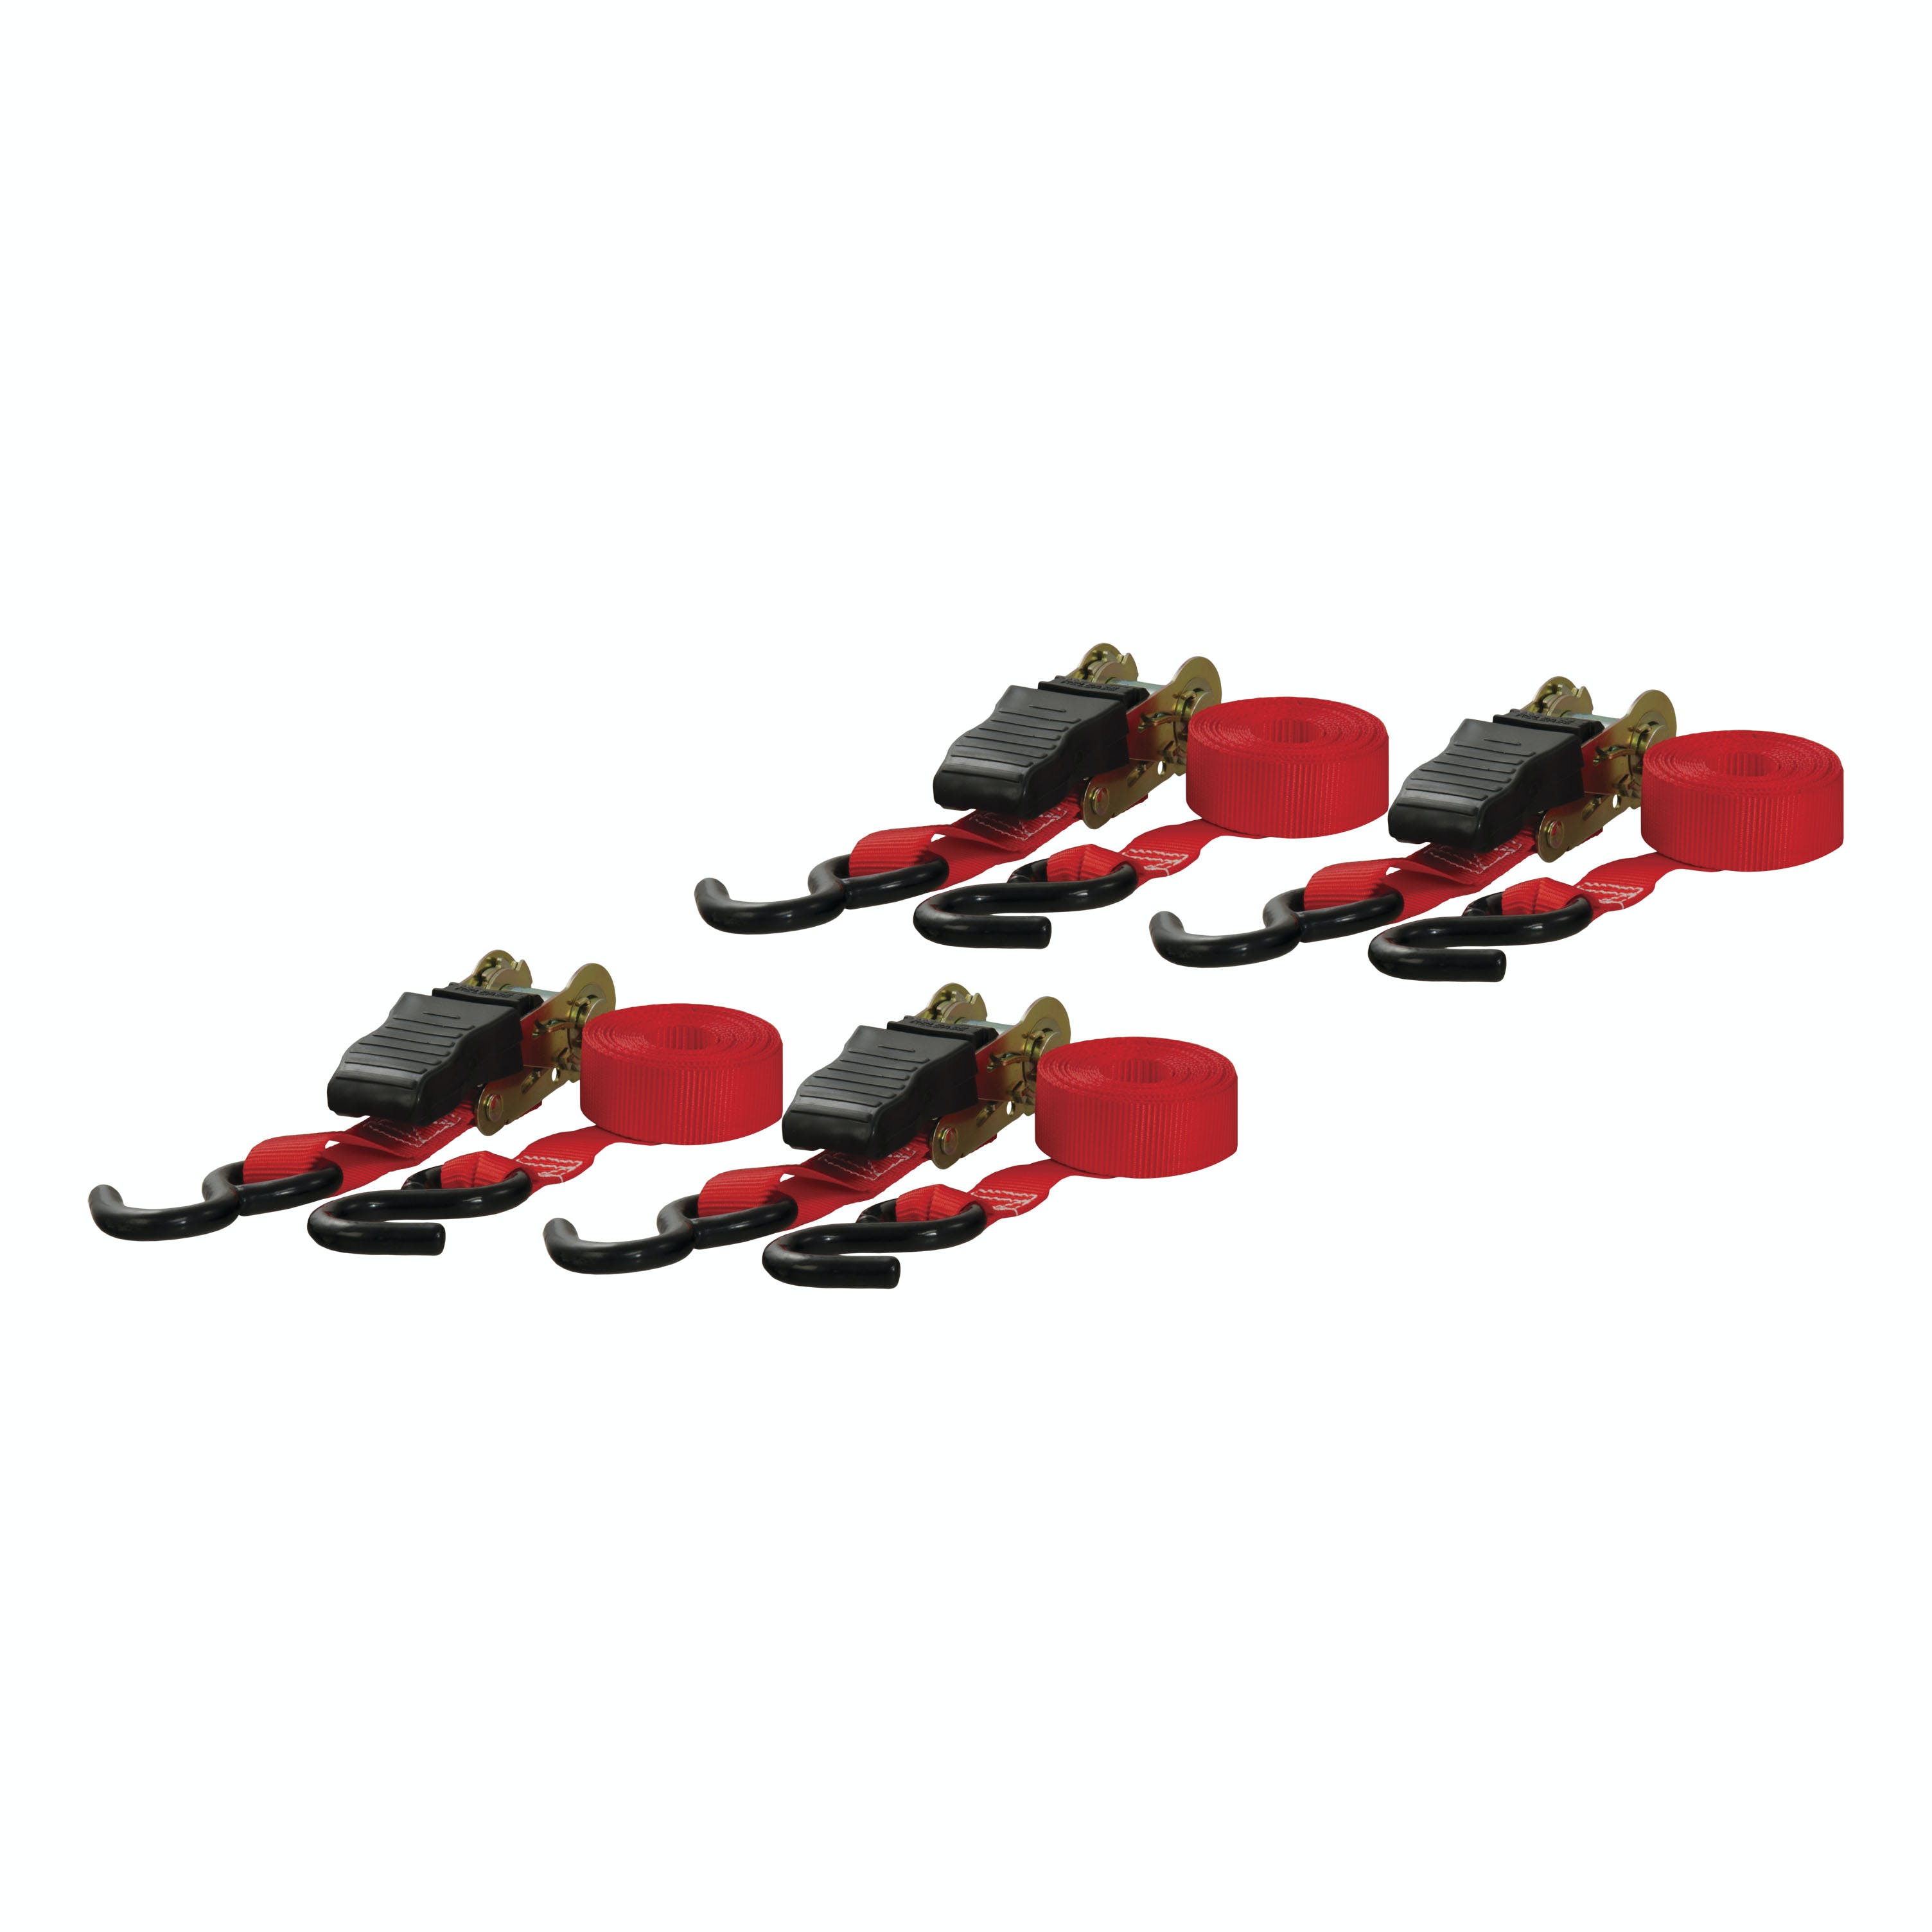 CURT 83002 16' Red Cargo Straps with S-Hooks (500 lbs, 4-Pack)